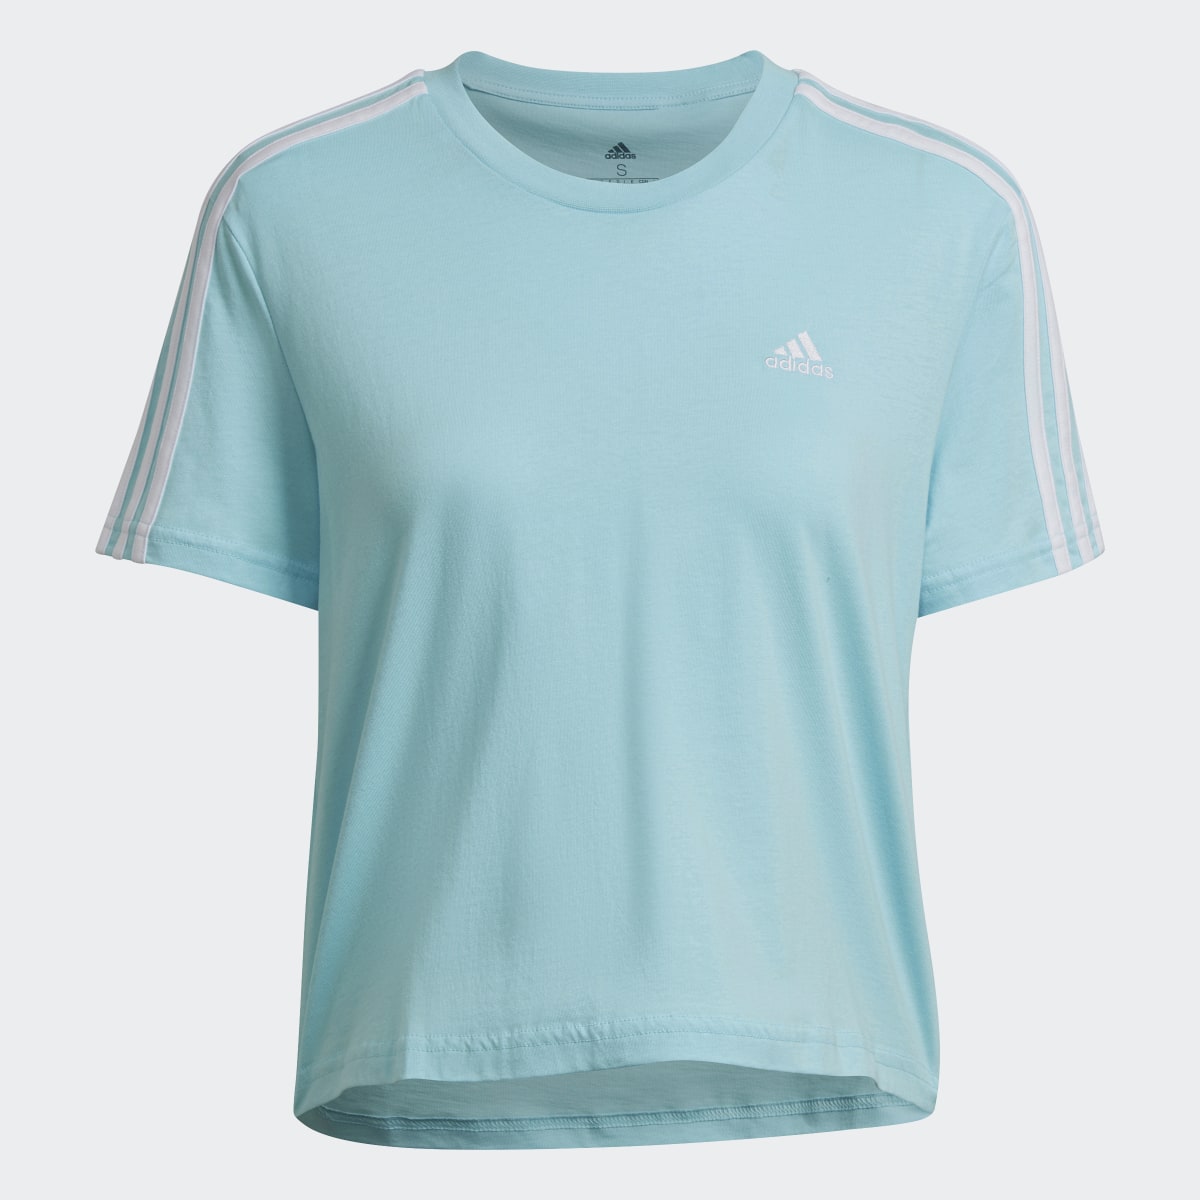 Adidas Essentials Loose 3-Stripes Cropped Tee. 5